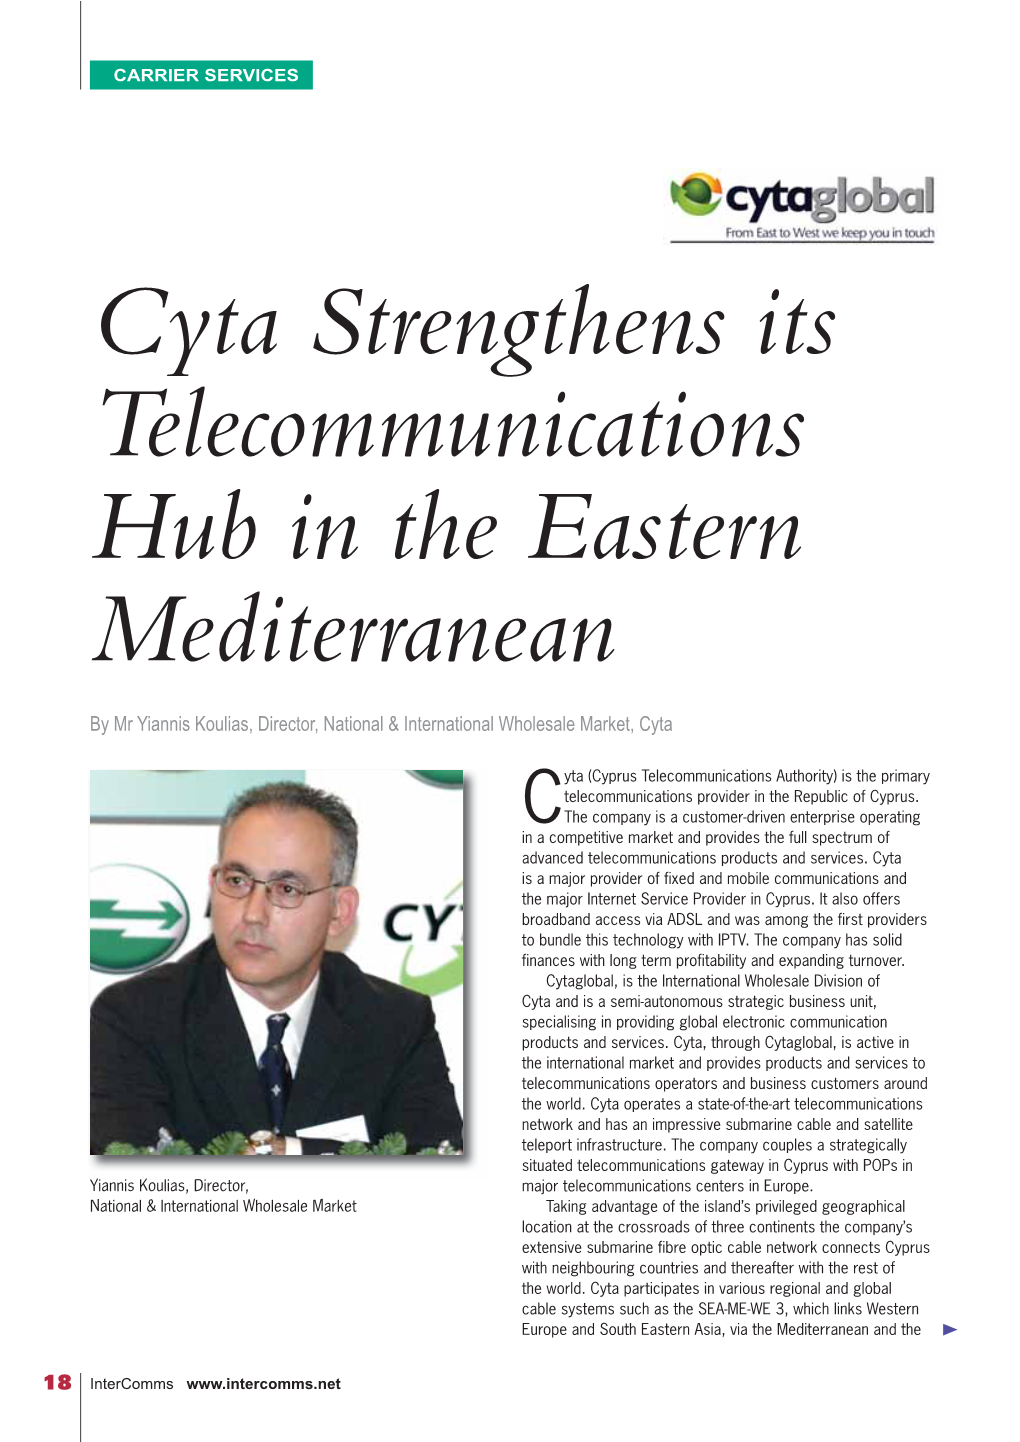 Cyta Strengthens Its Telecommunications Hub in the Eastern Mediterranean